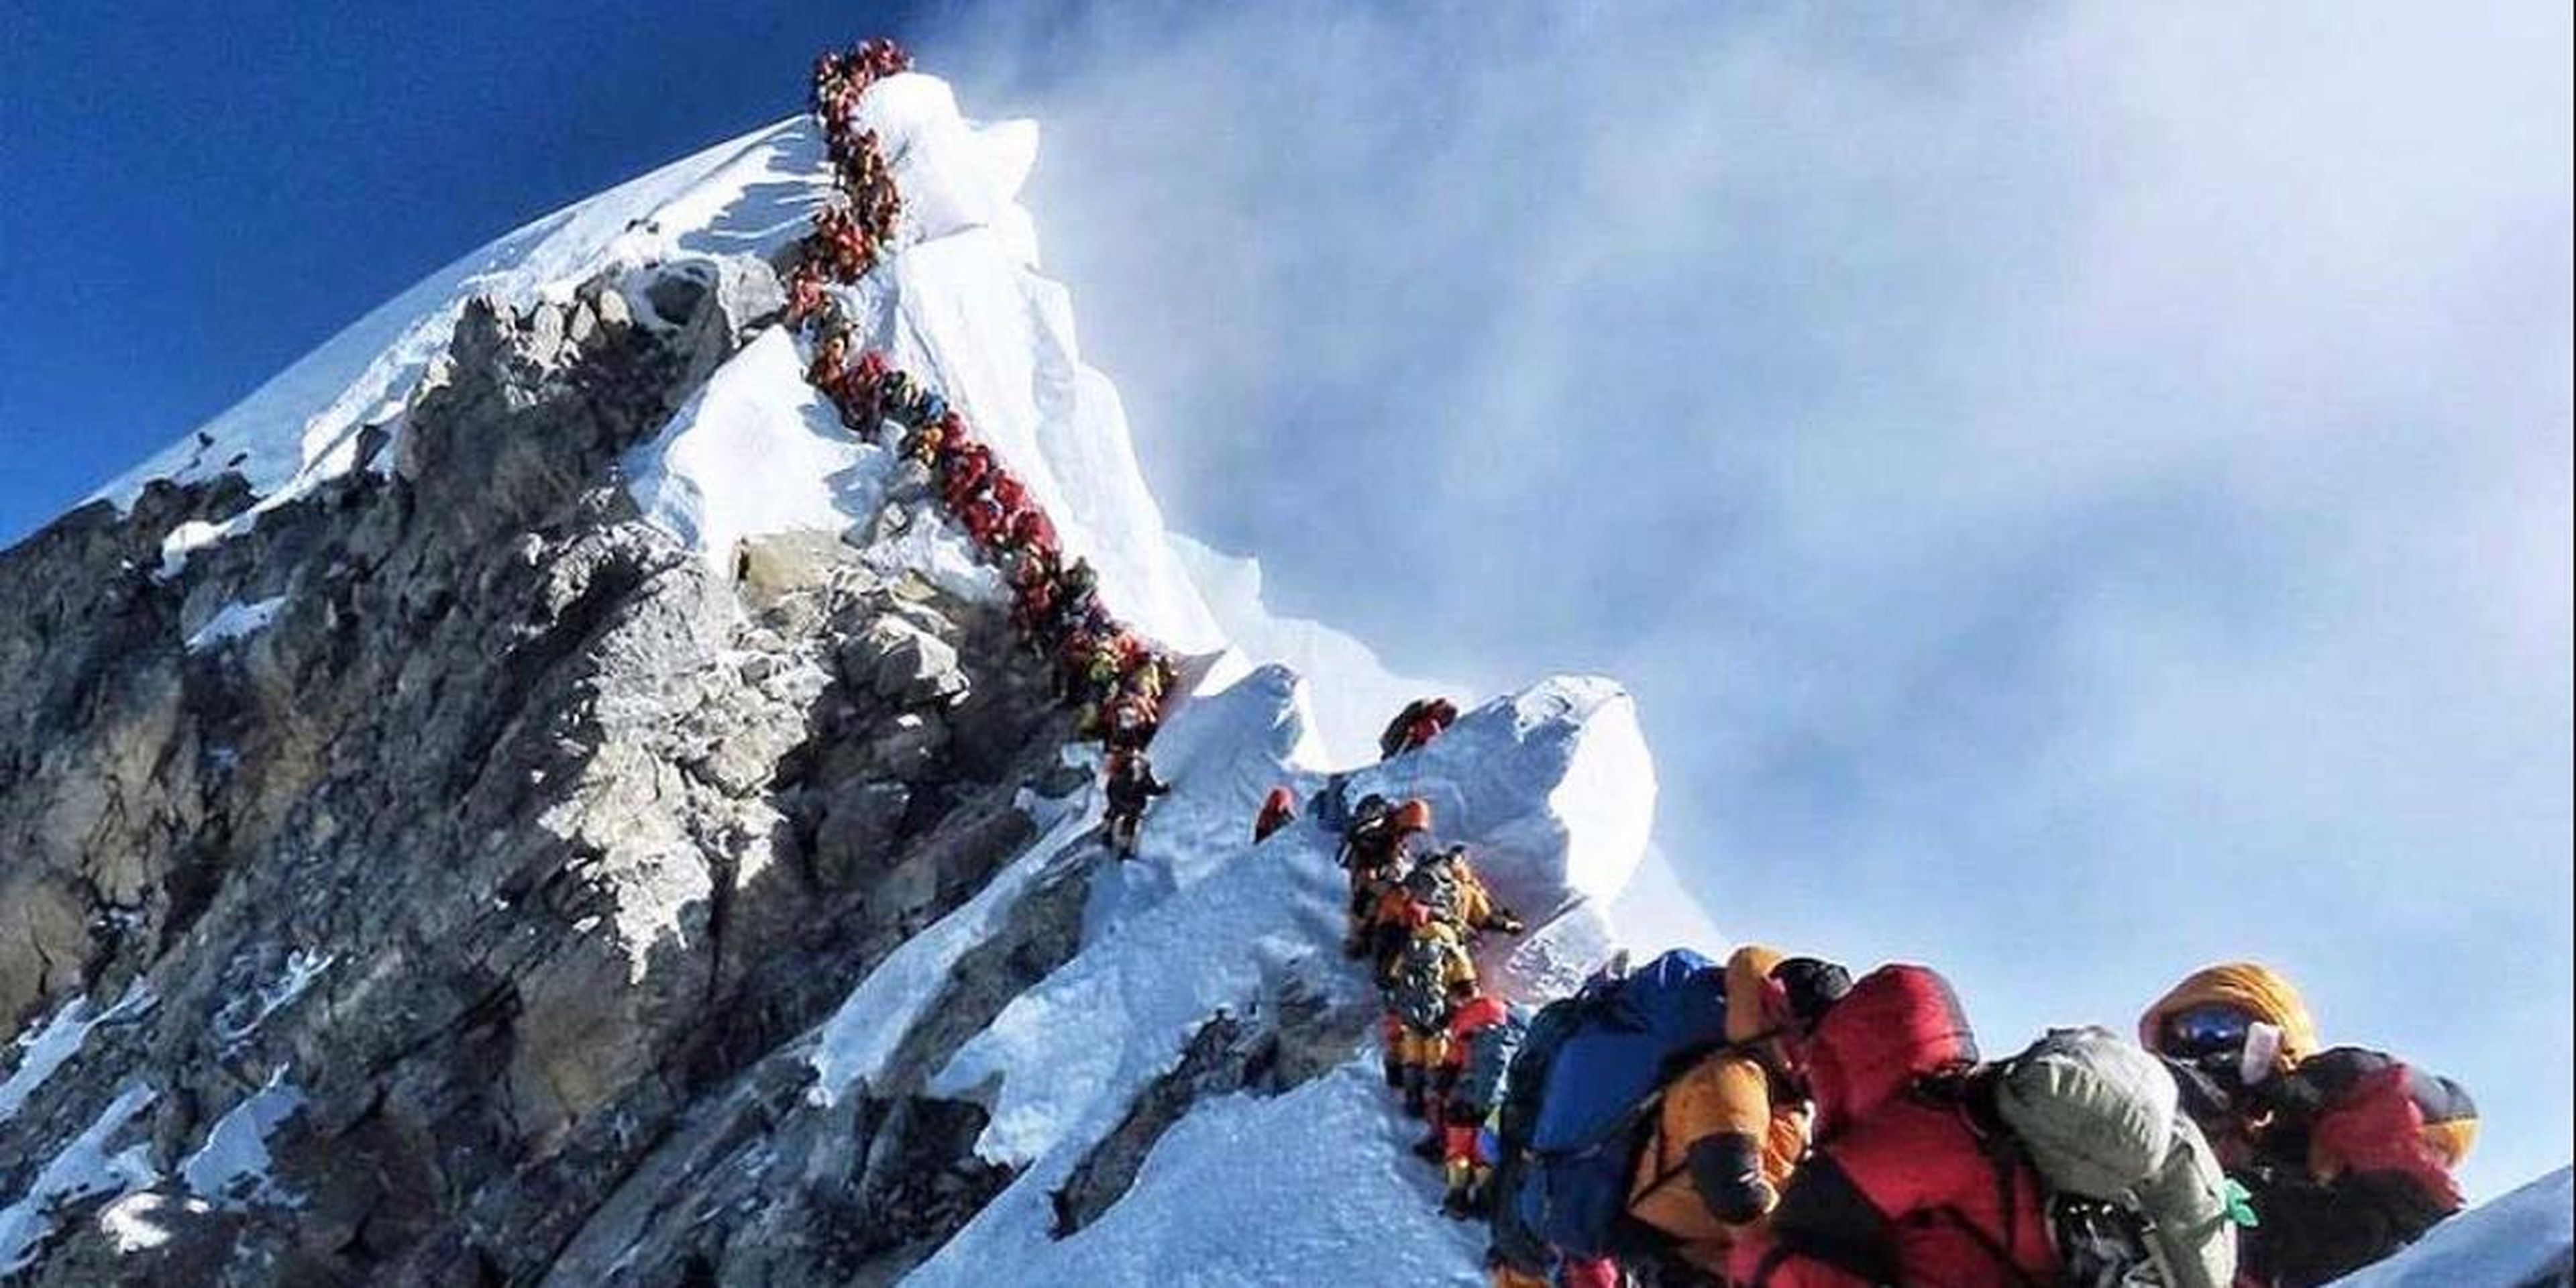 Climbers waiting in the "death zone" to summit Mount Everest.